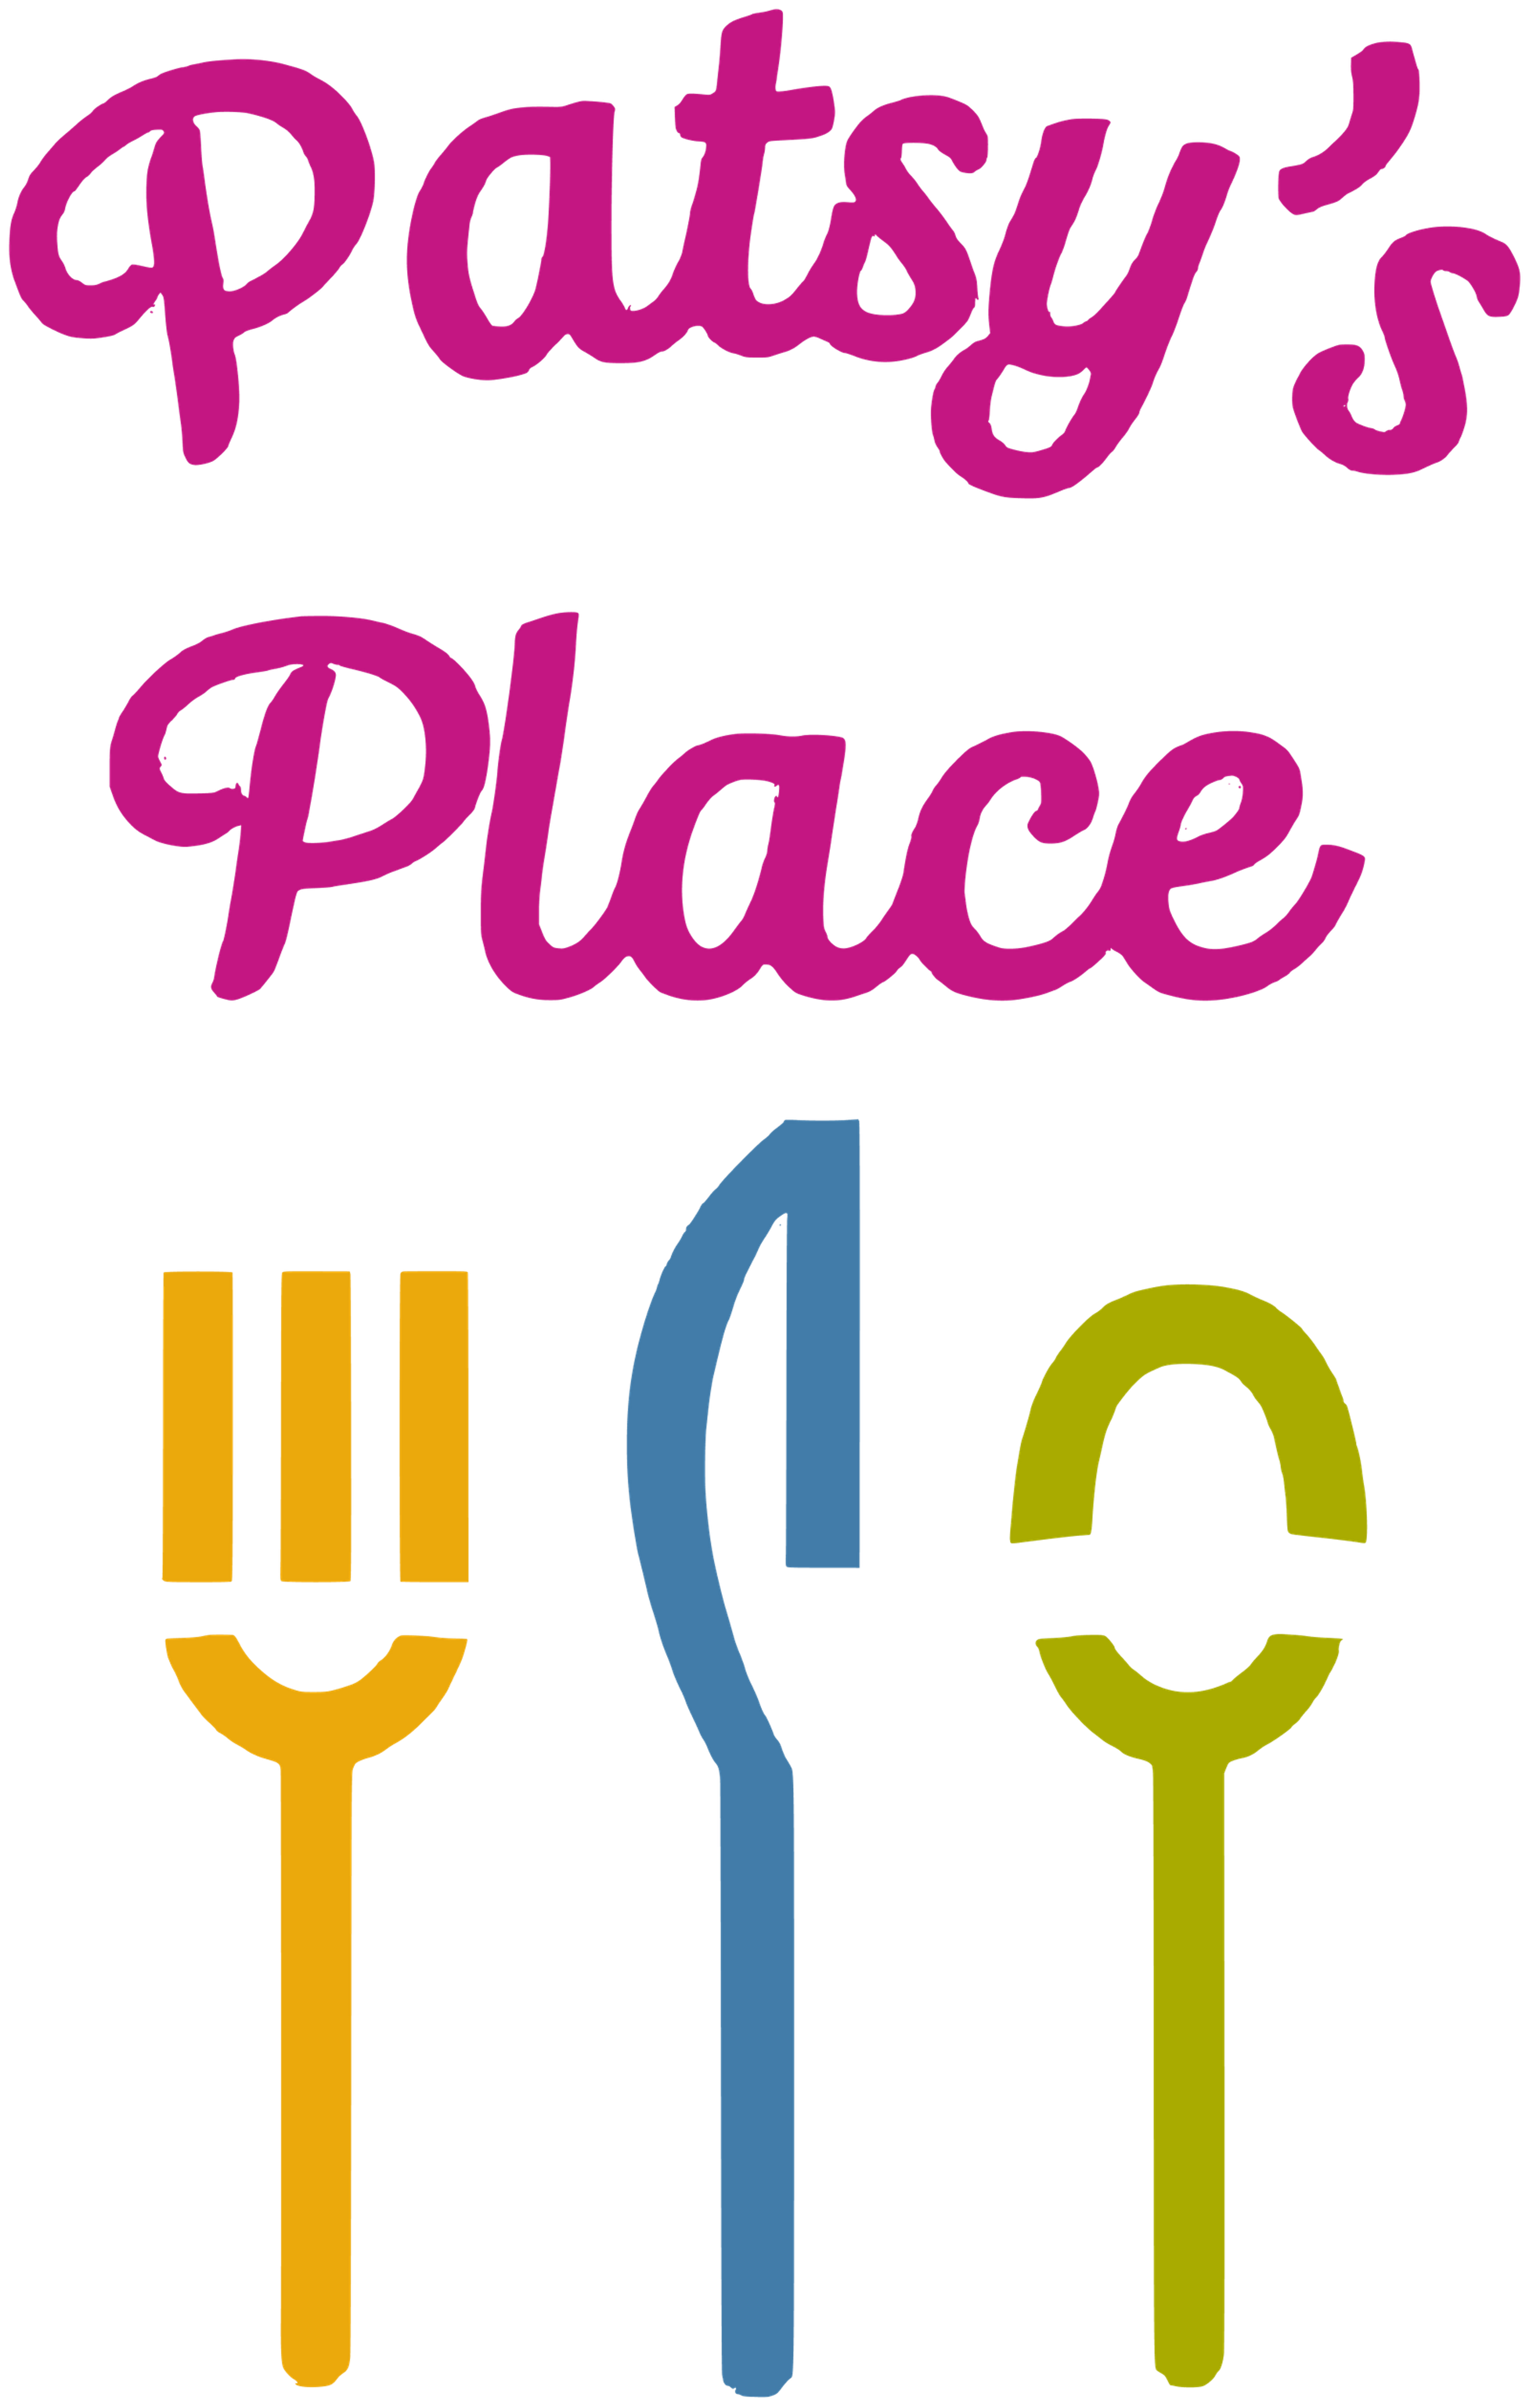 Patsy's Place logo on a transparent background